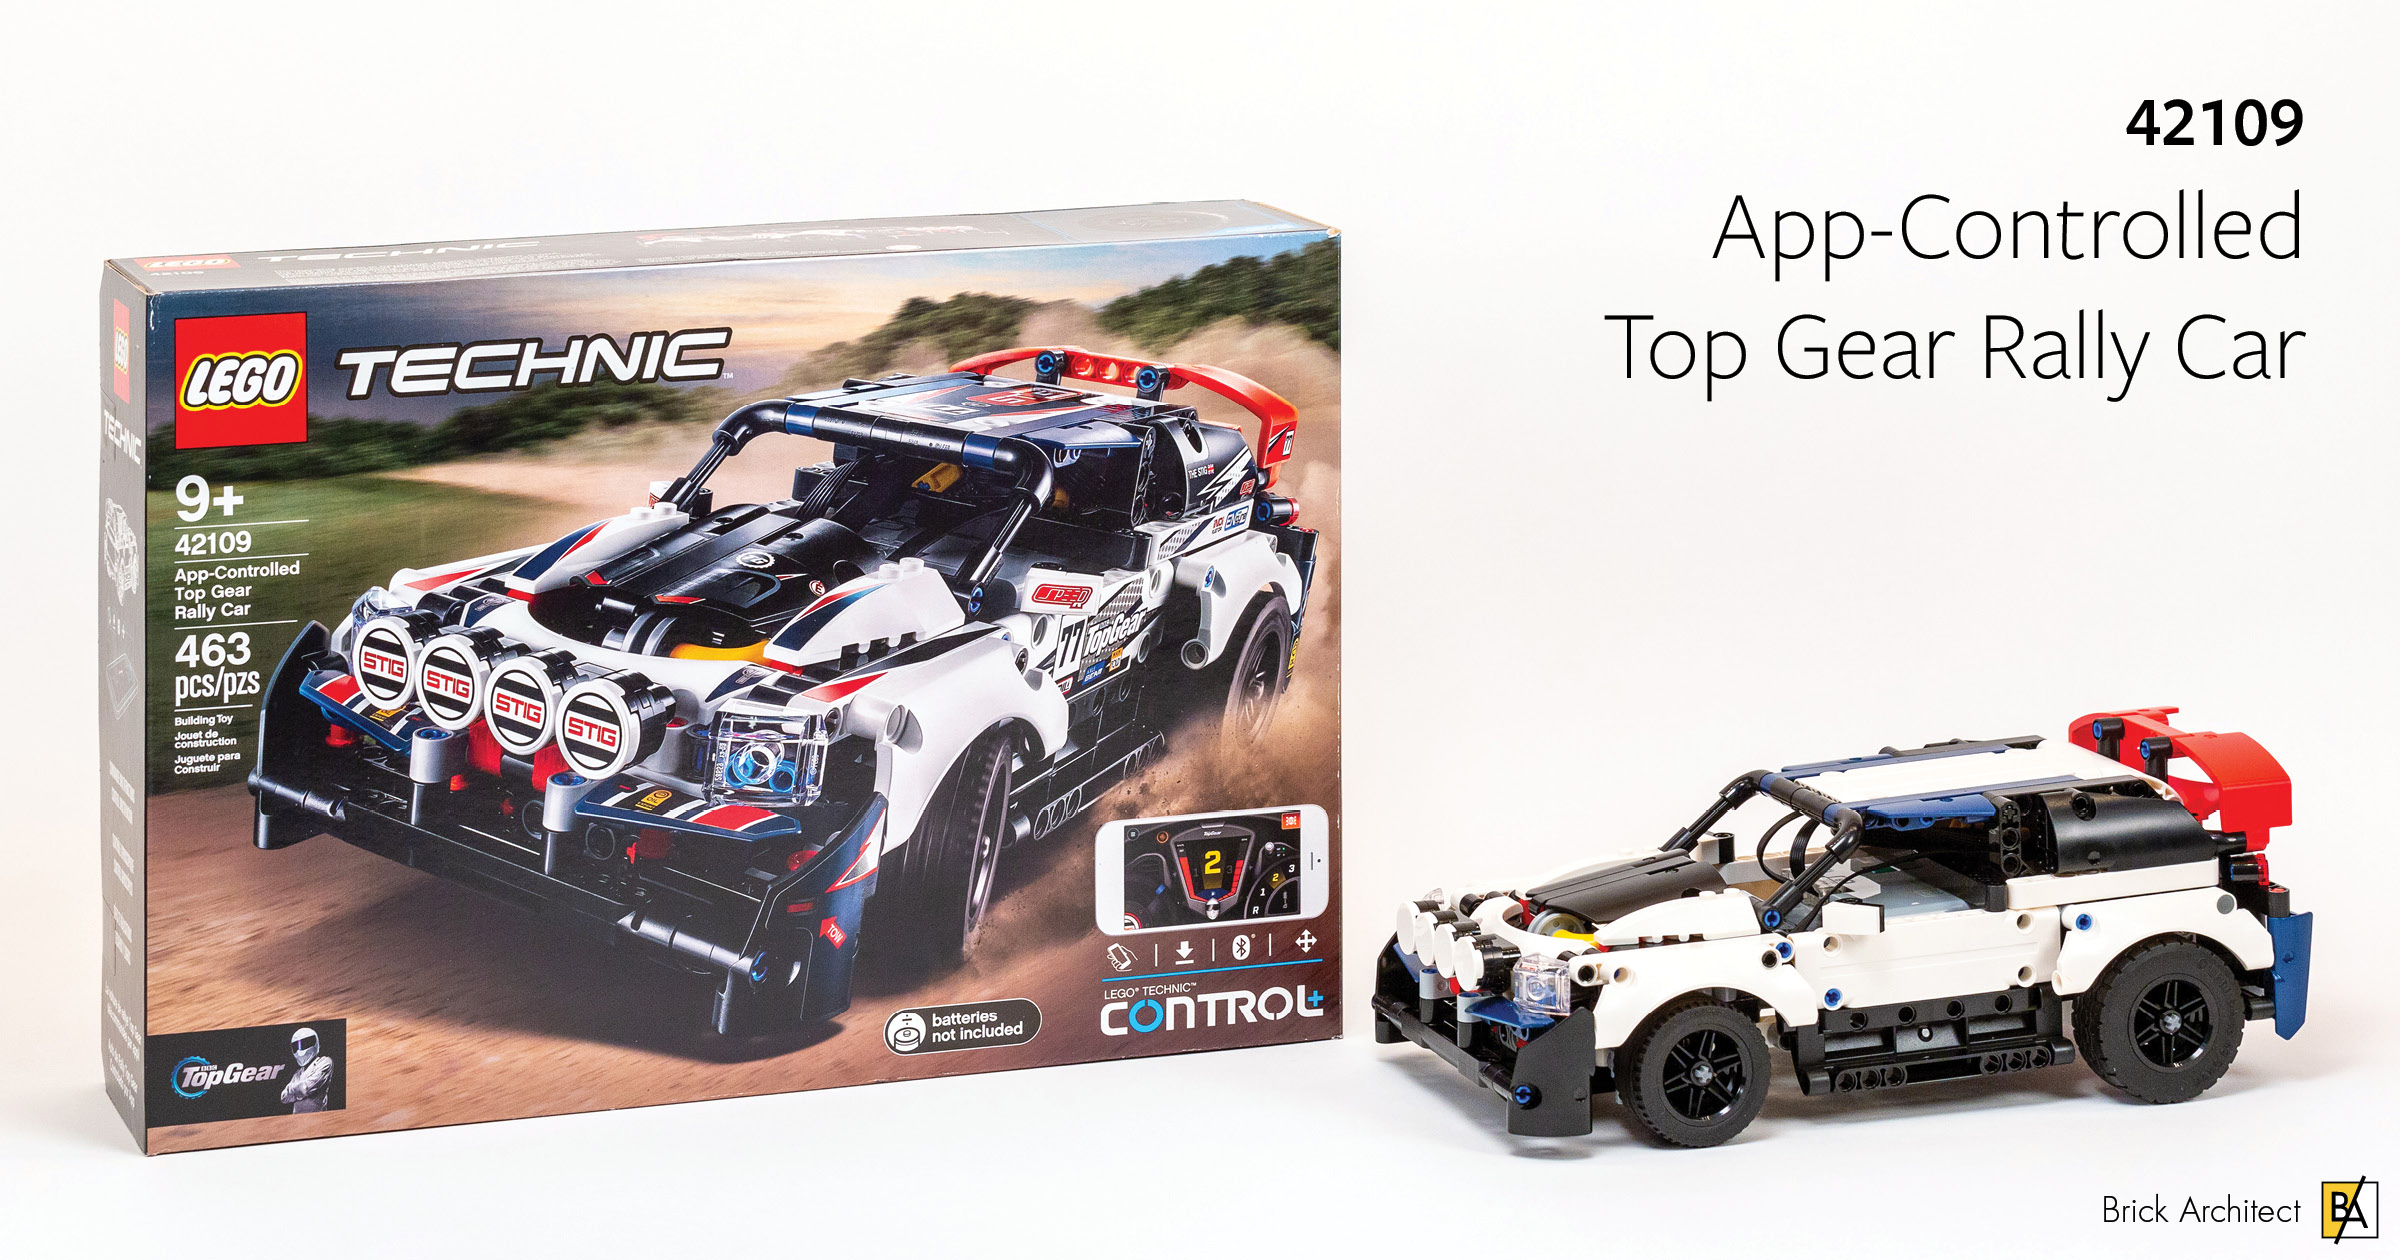 En smule Eastern Shah Review: #42109 App-controlled Top Gear Rally Car - BRICK ARCHITECT